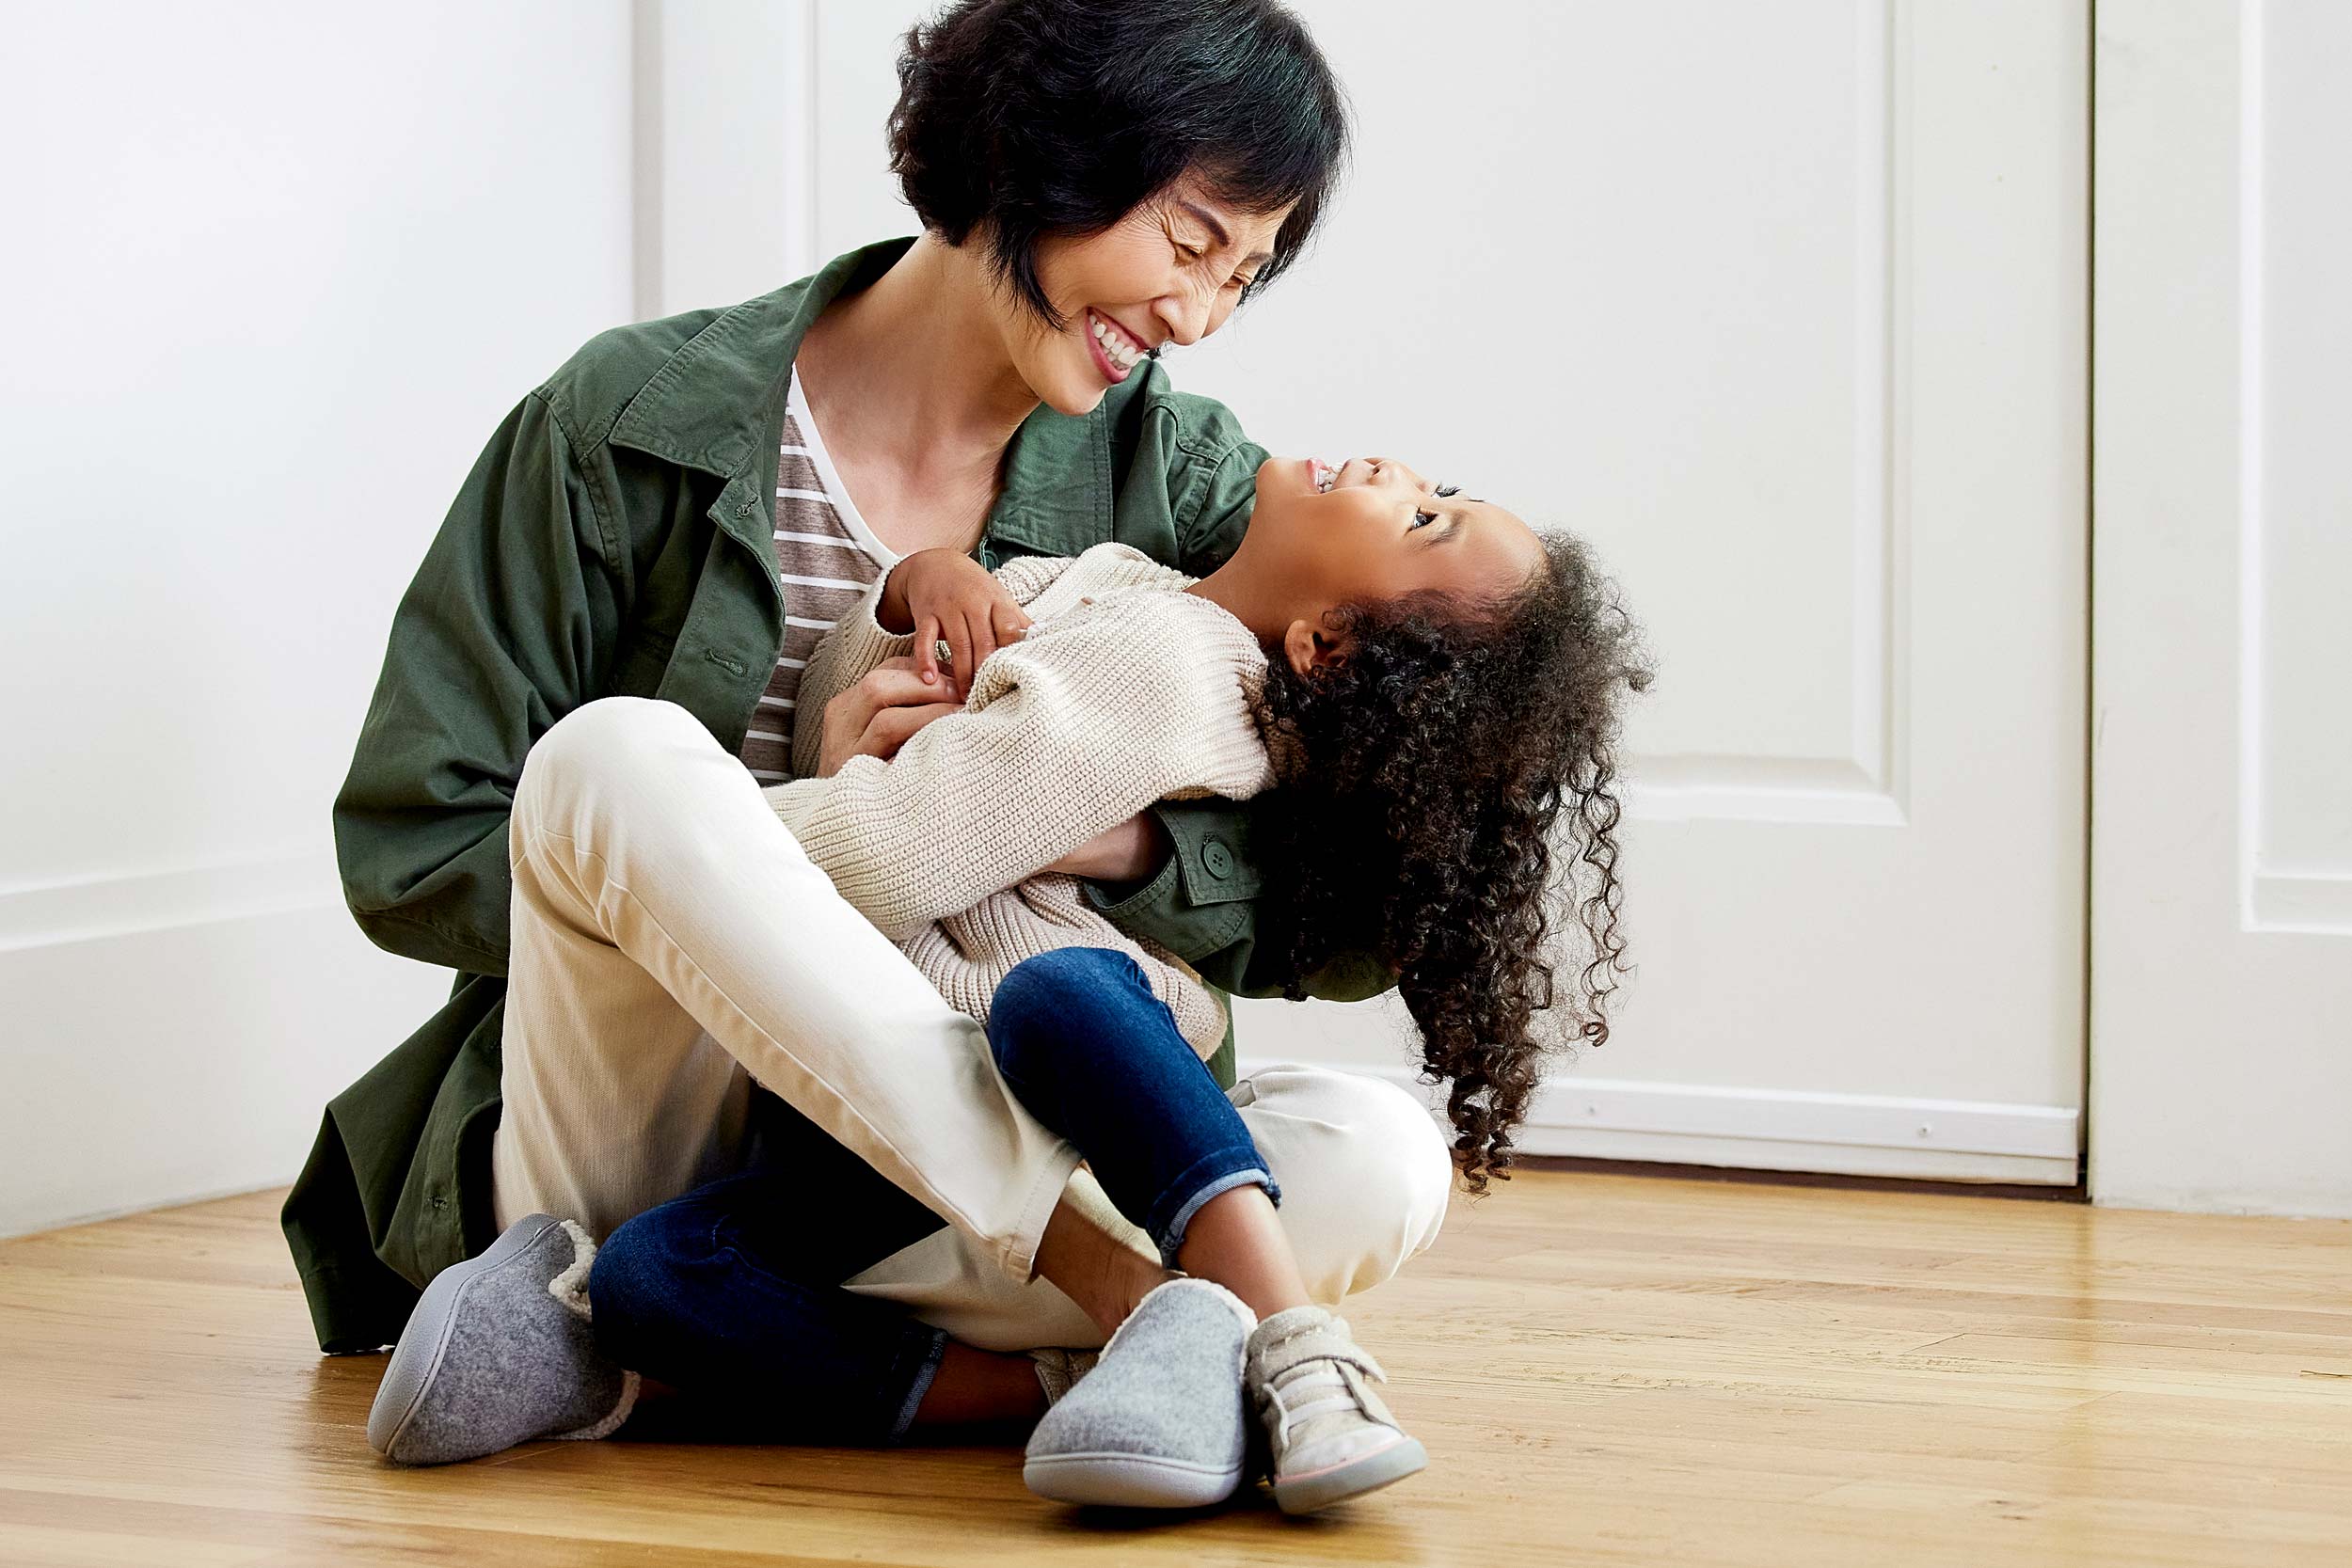 Indoor Lifestyle photograph of a grandmother and granddaughter enjoying time together laughing.